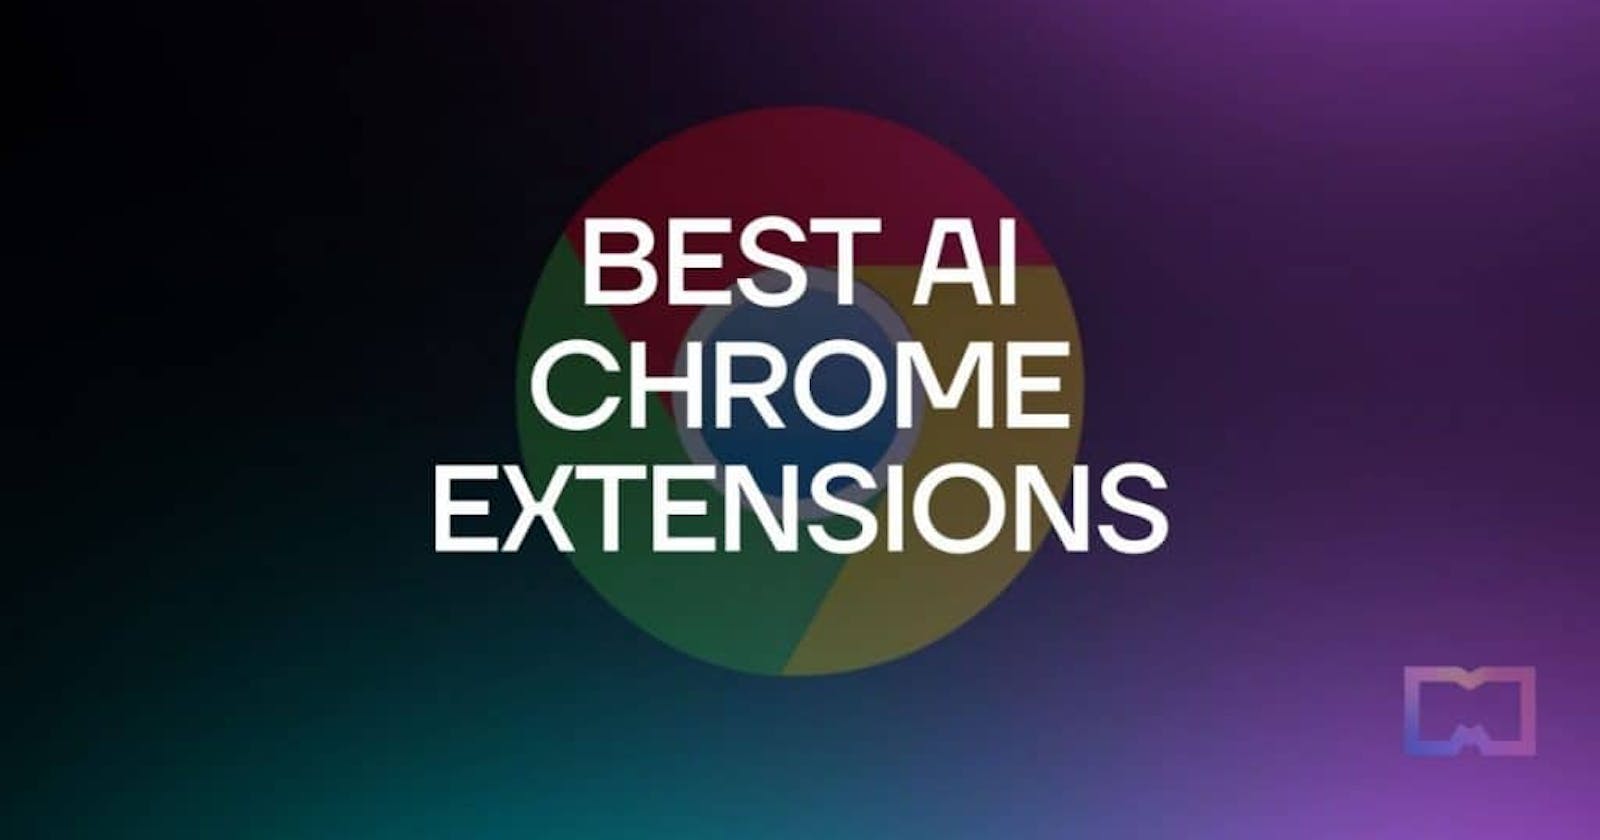 10 Best AI Chrome Extensions for Developers